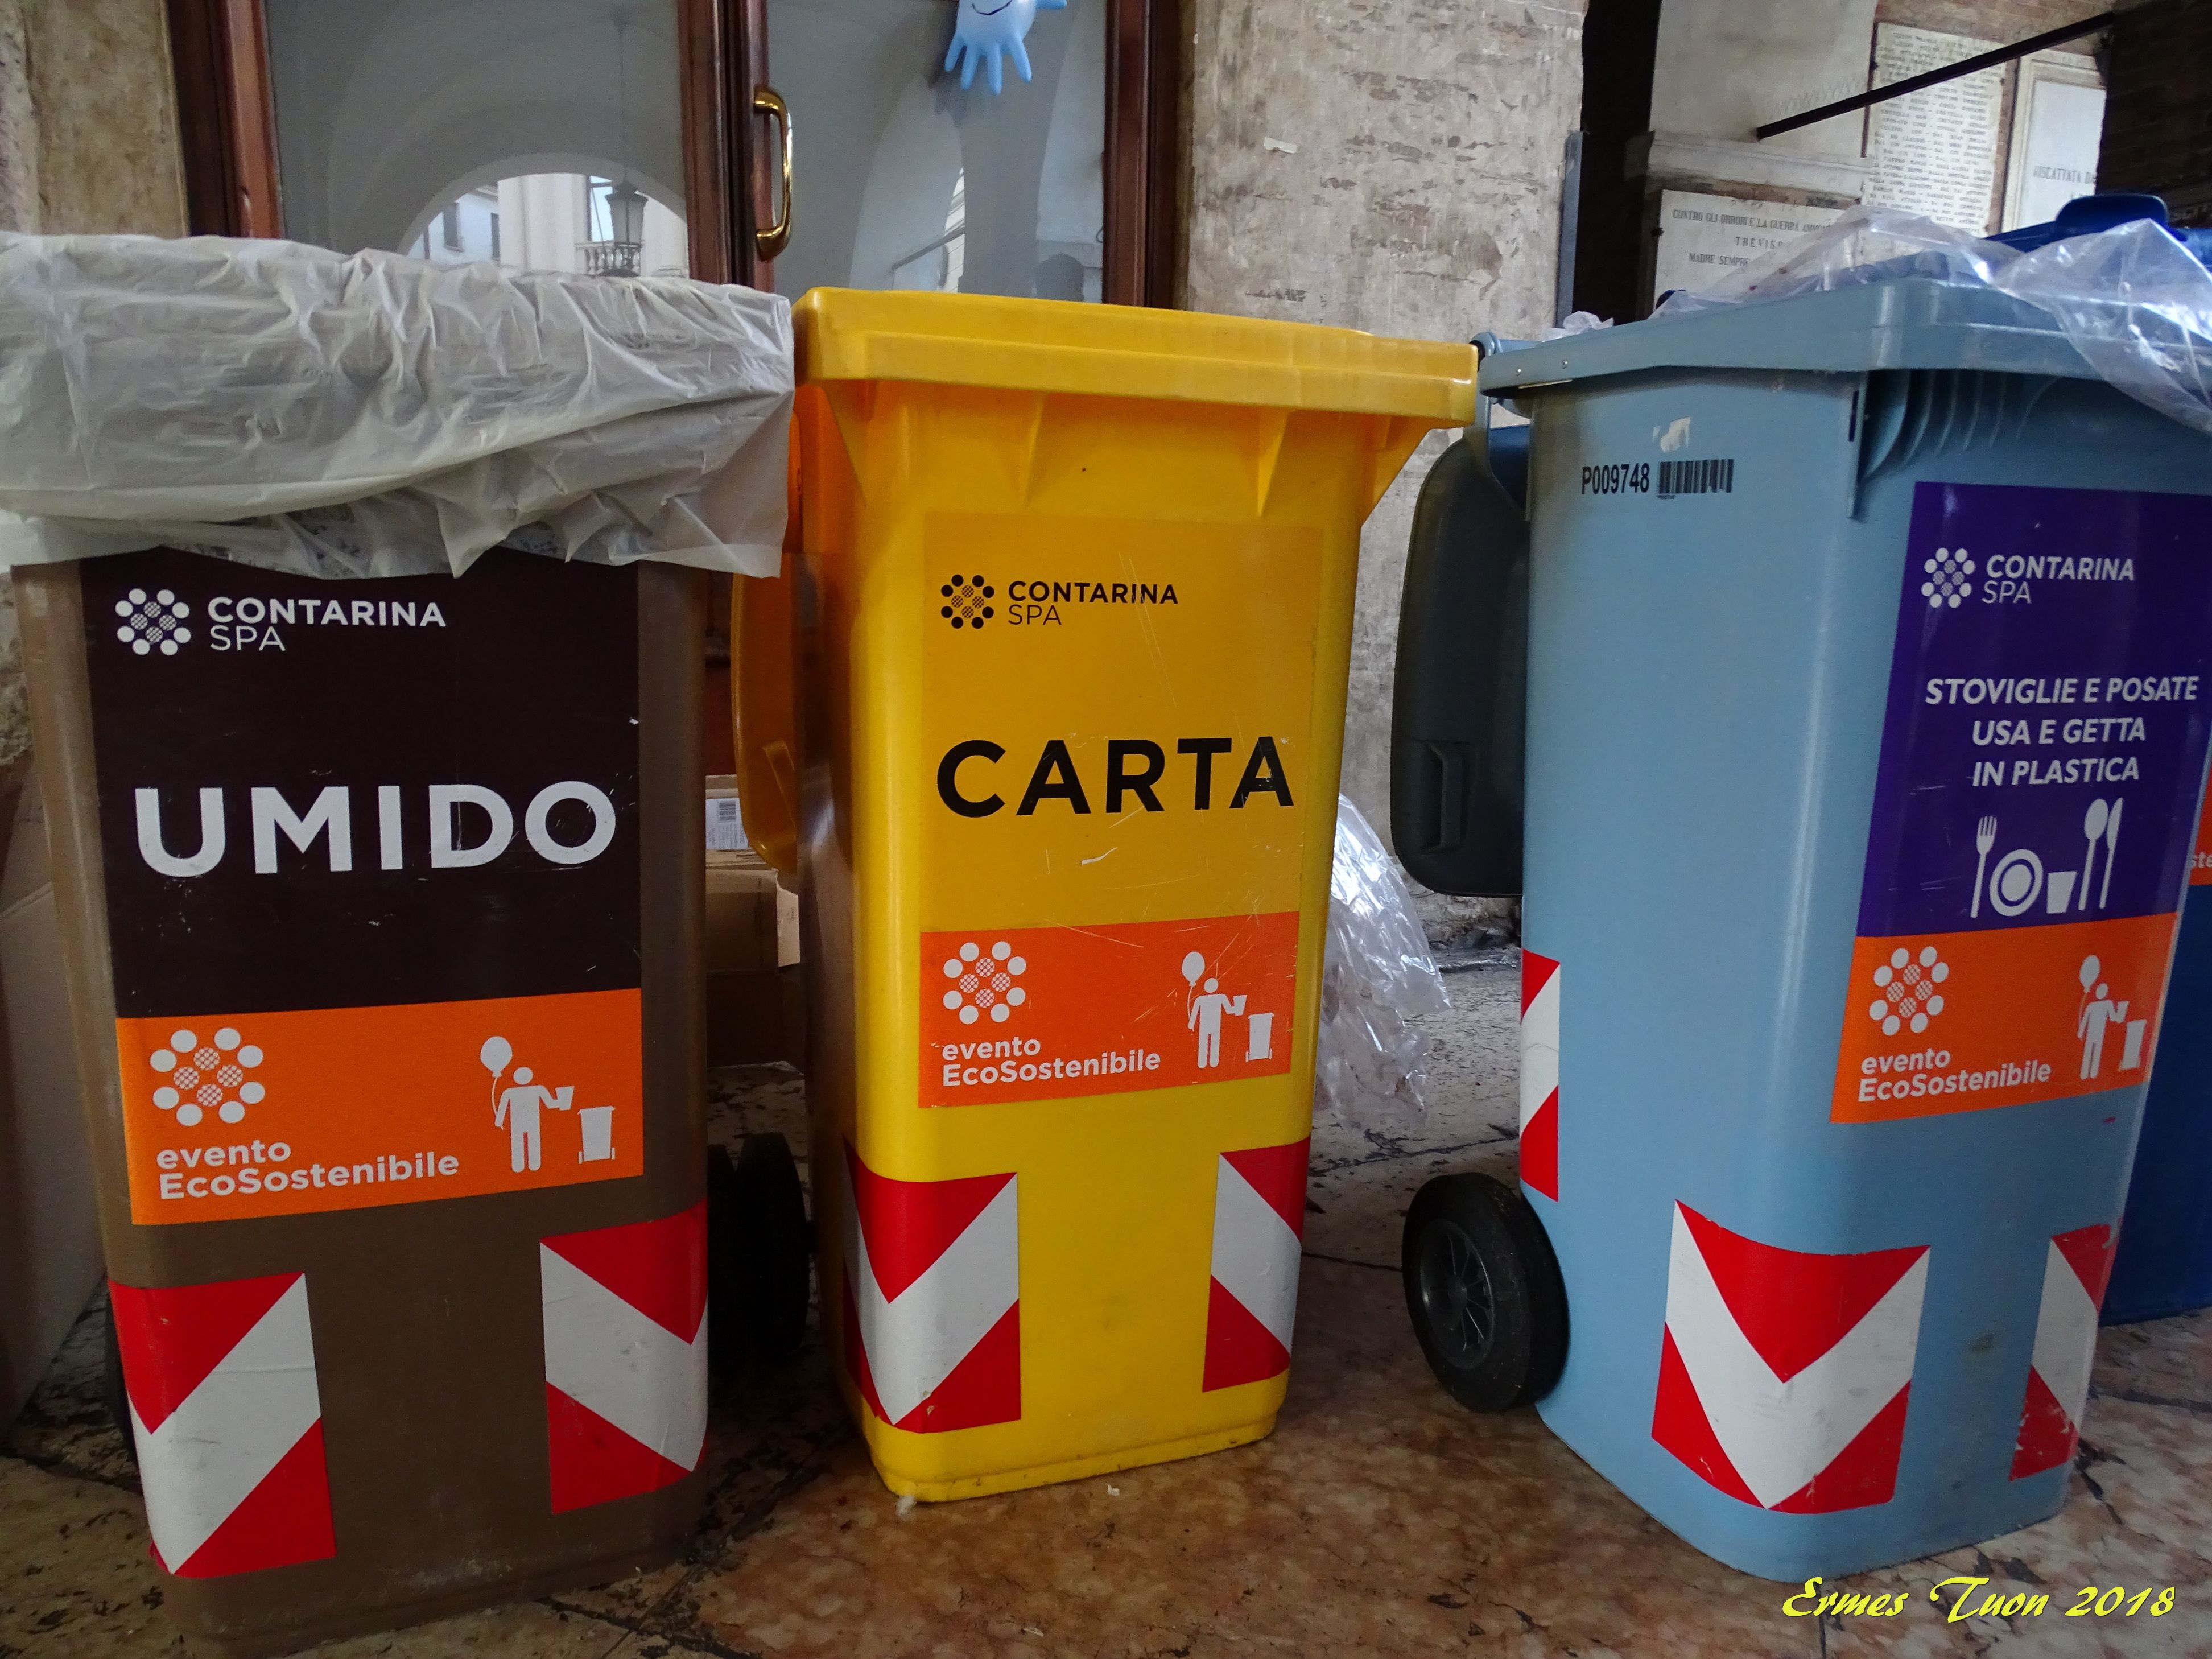 Caption: Special containers for collecting waste at the tiramisù Day - The containers are distributed by the waste company for increasing the separation between different kind of waste - Local Guide @ermest